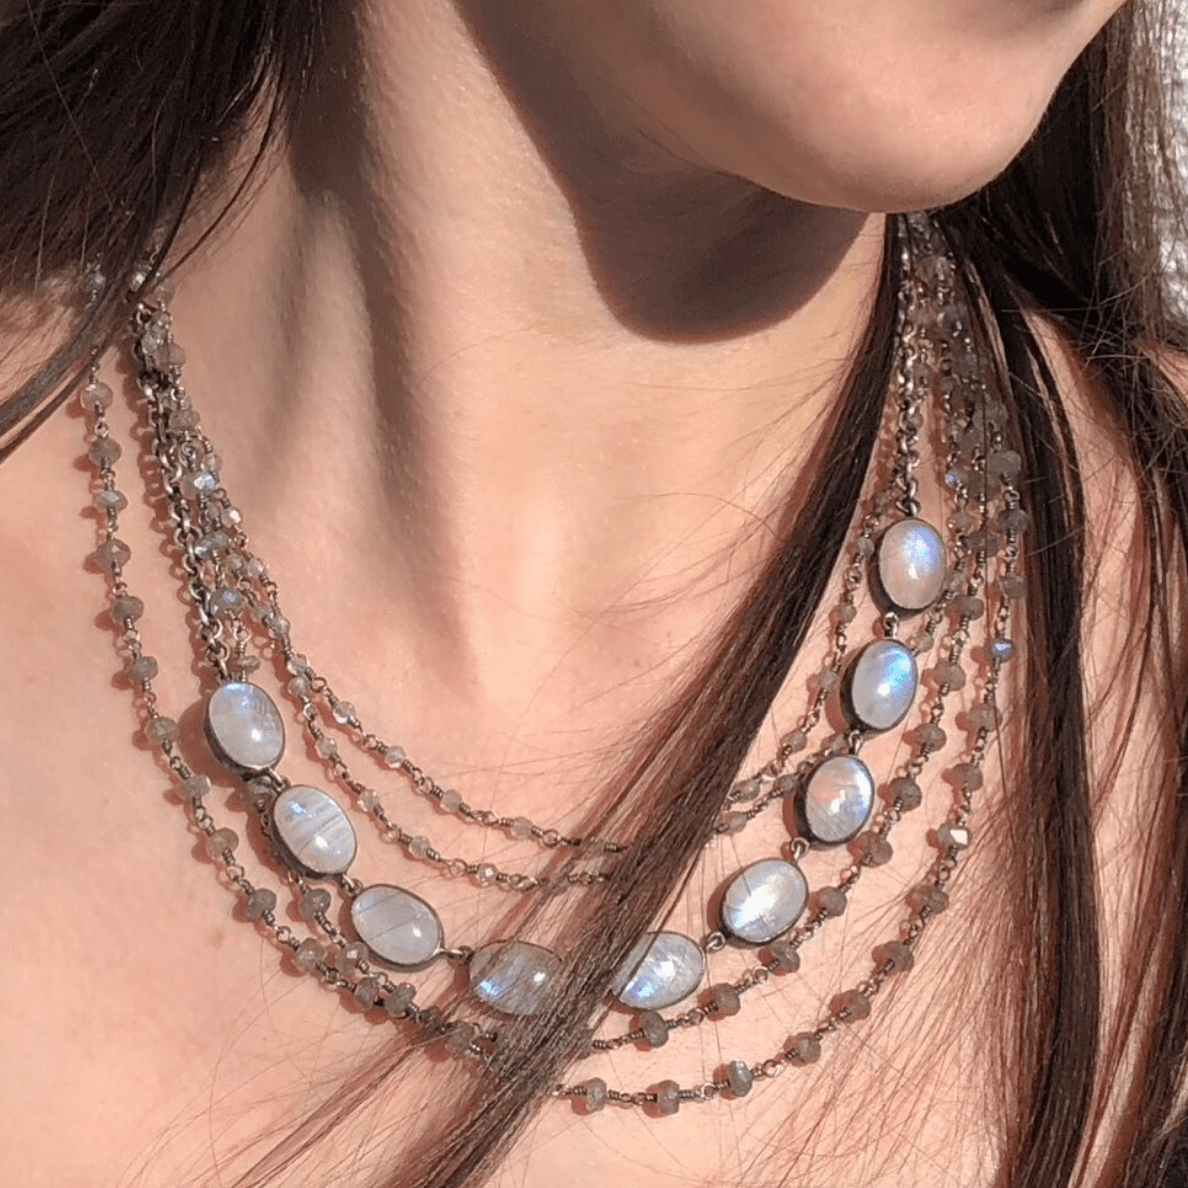 NKL Labradorite Oxidized Rosary Chain Necklace